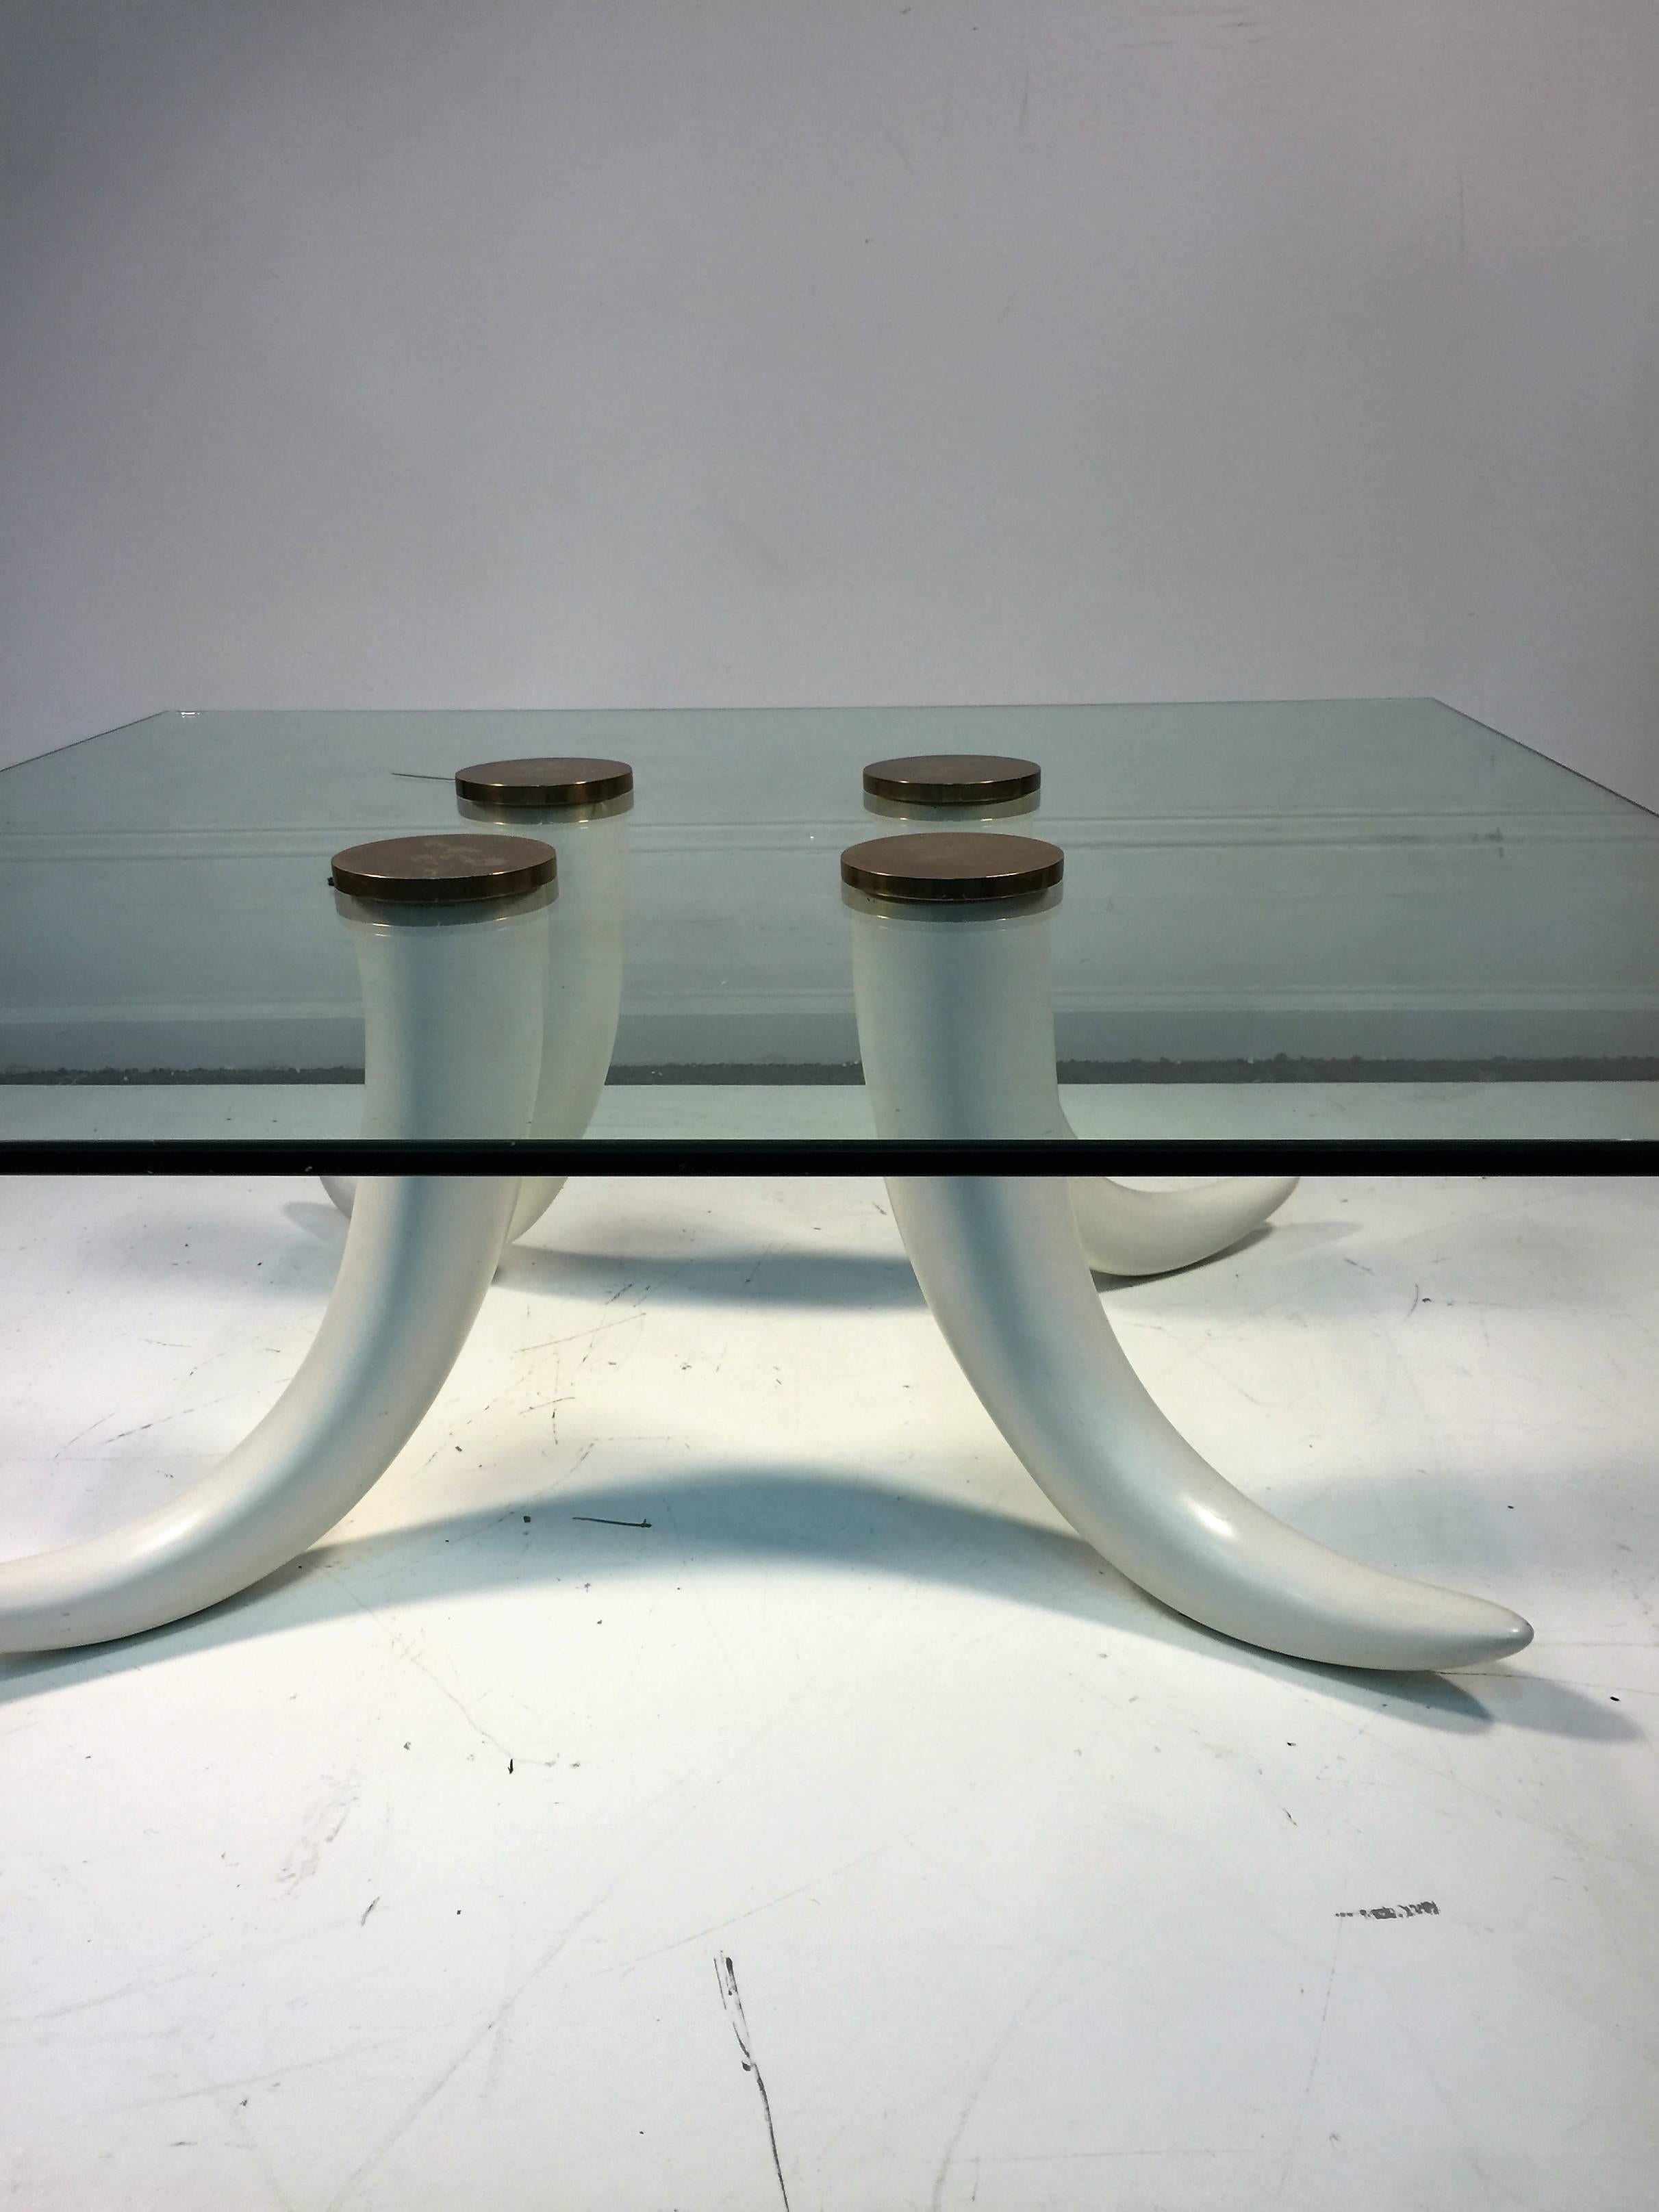 Simple yet dramatic composite cast tusk coffee table with solid brass Connecting caps. Would suit many modern interiors with the call of the wild
Yet totally humane subject. The glass top is 1/2